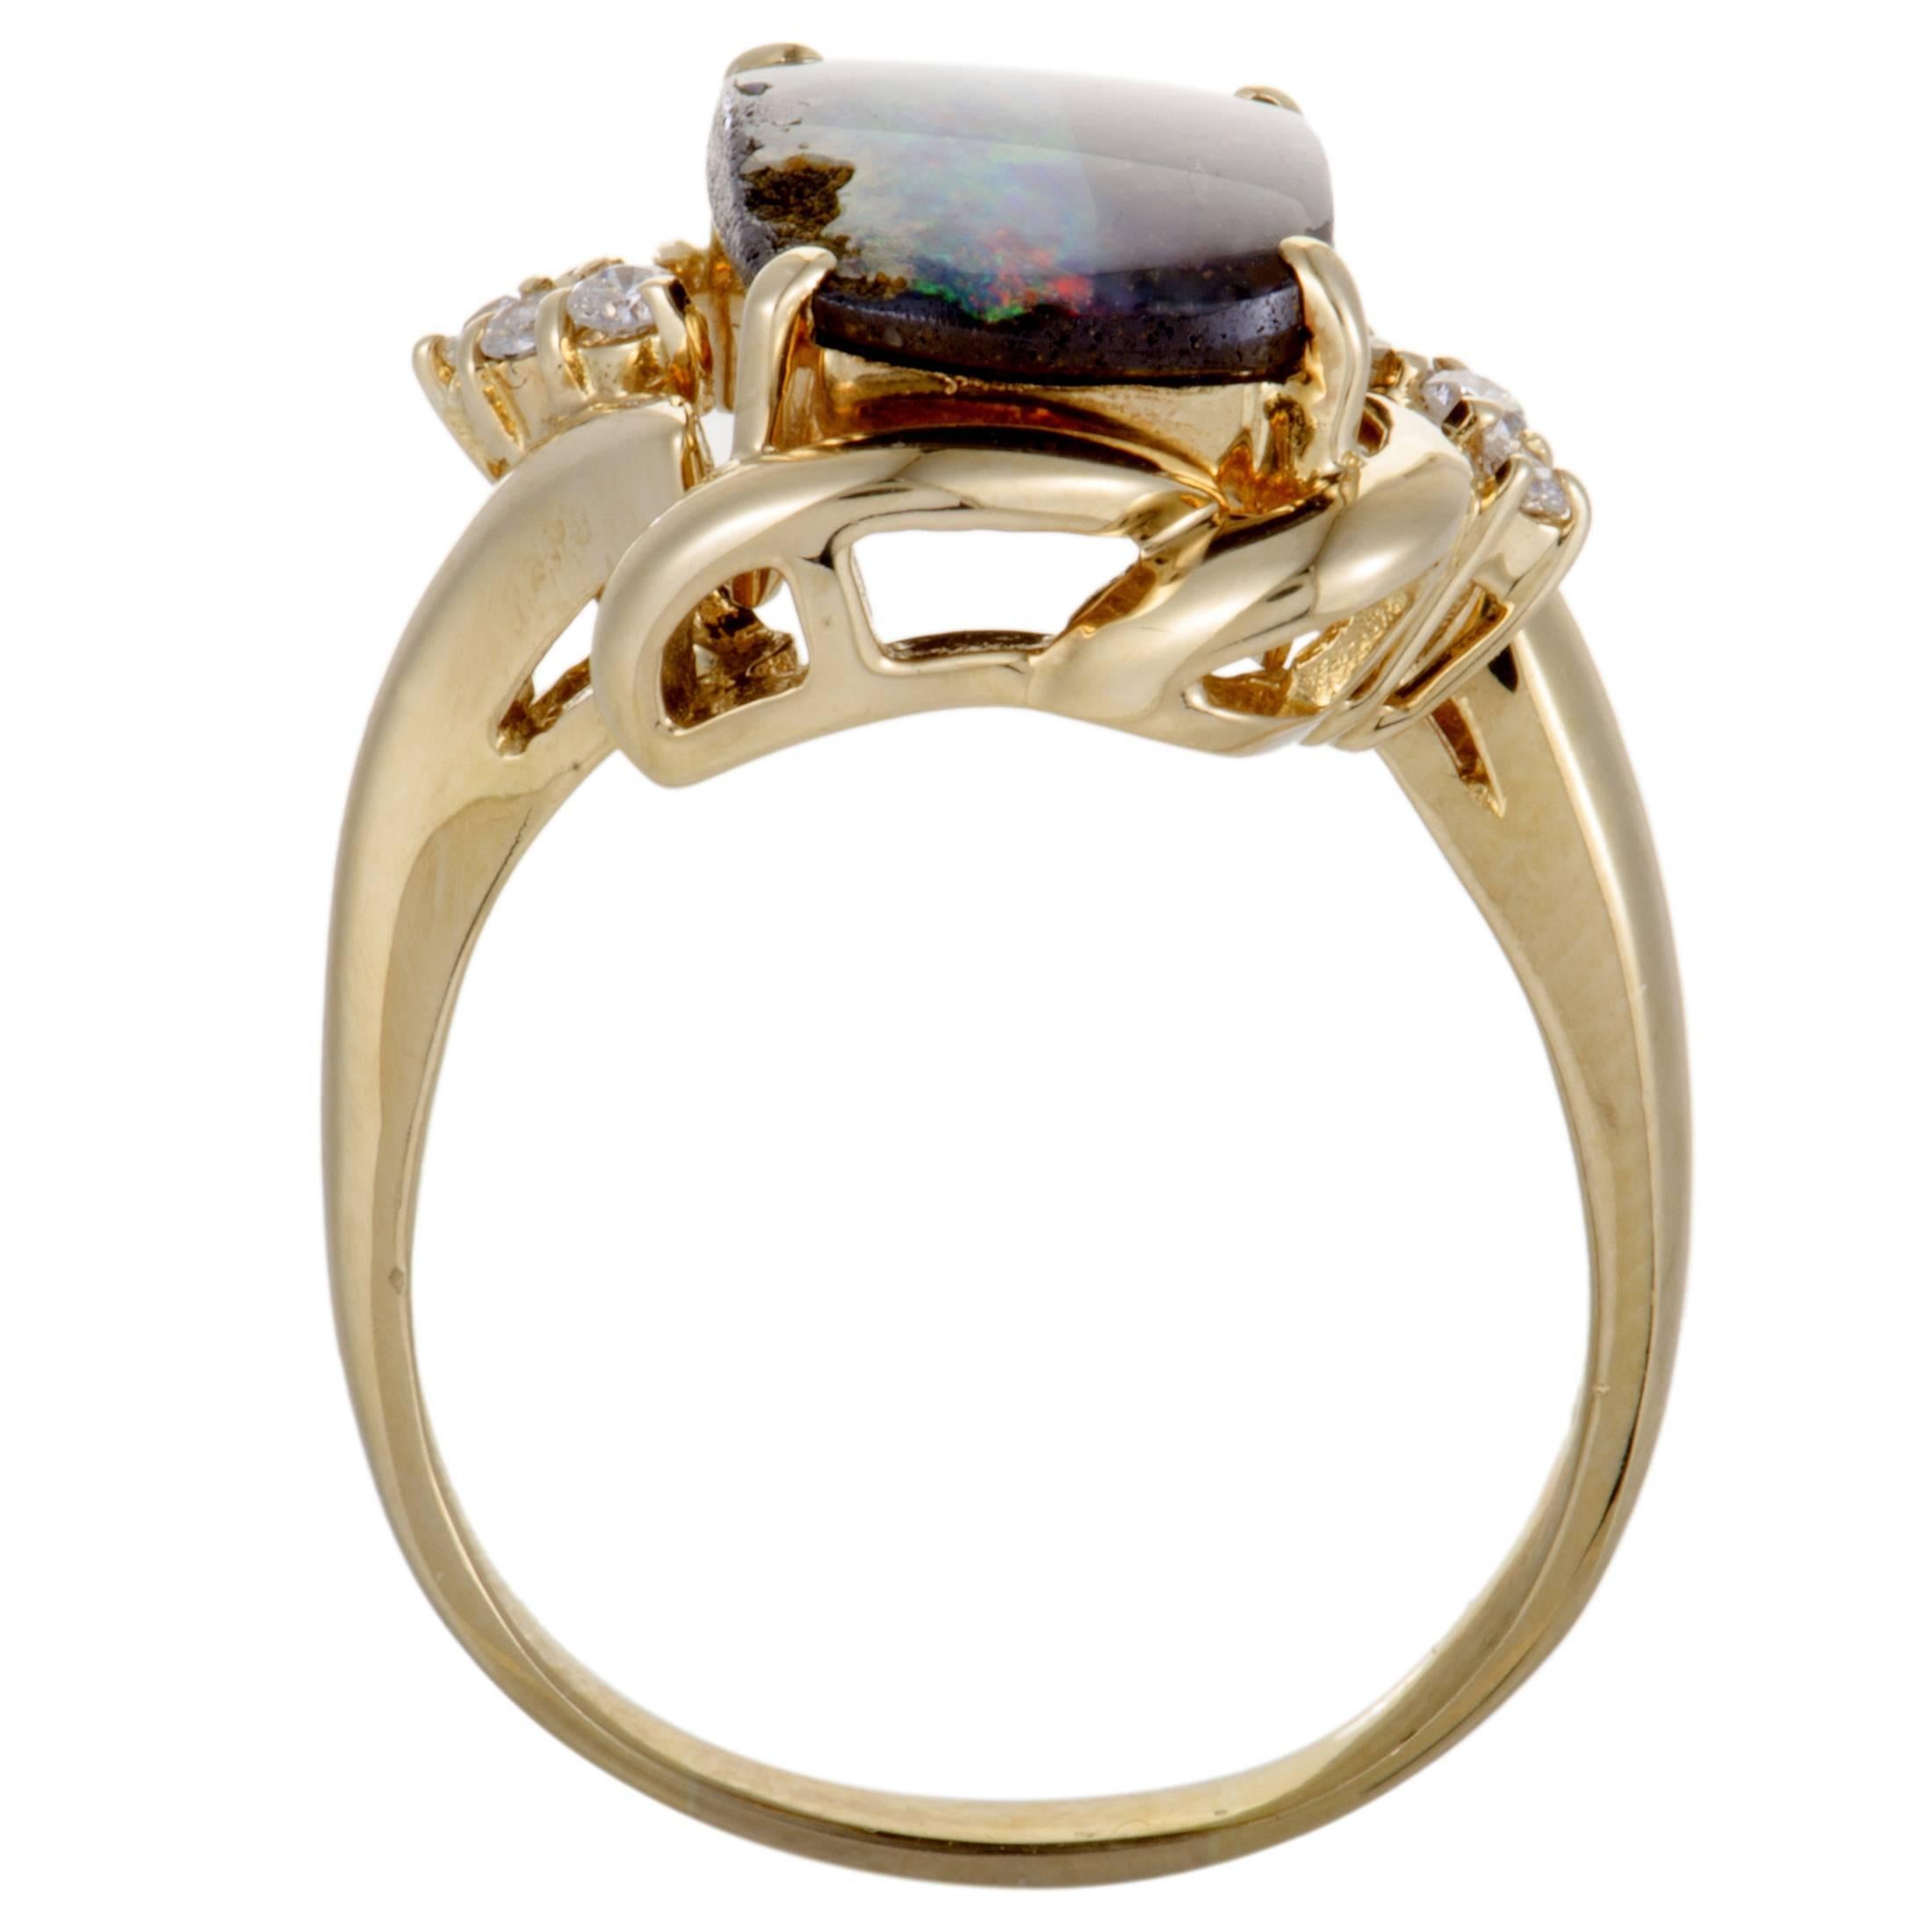 This beautiful ring is a spectacularly designed in shimmering 18K yellow gold. The incredible ring features 0.15ct of sparkling diamonds and a stunning green and red opal stone of 3.94ct in its incredible design that enhance the extravagance of the